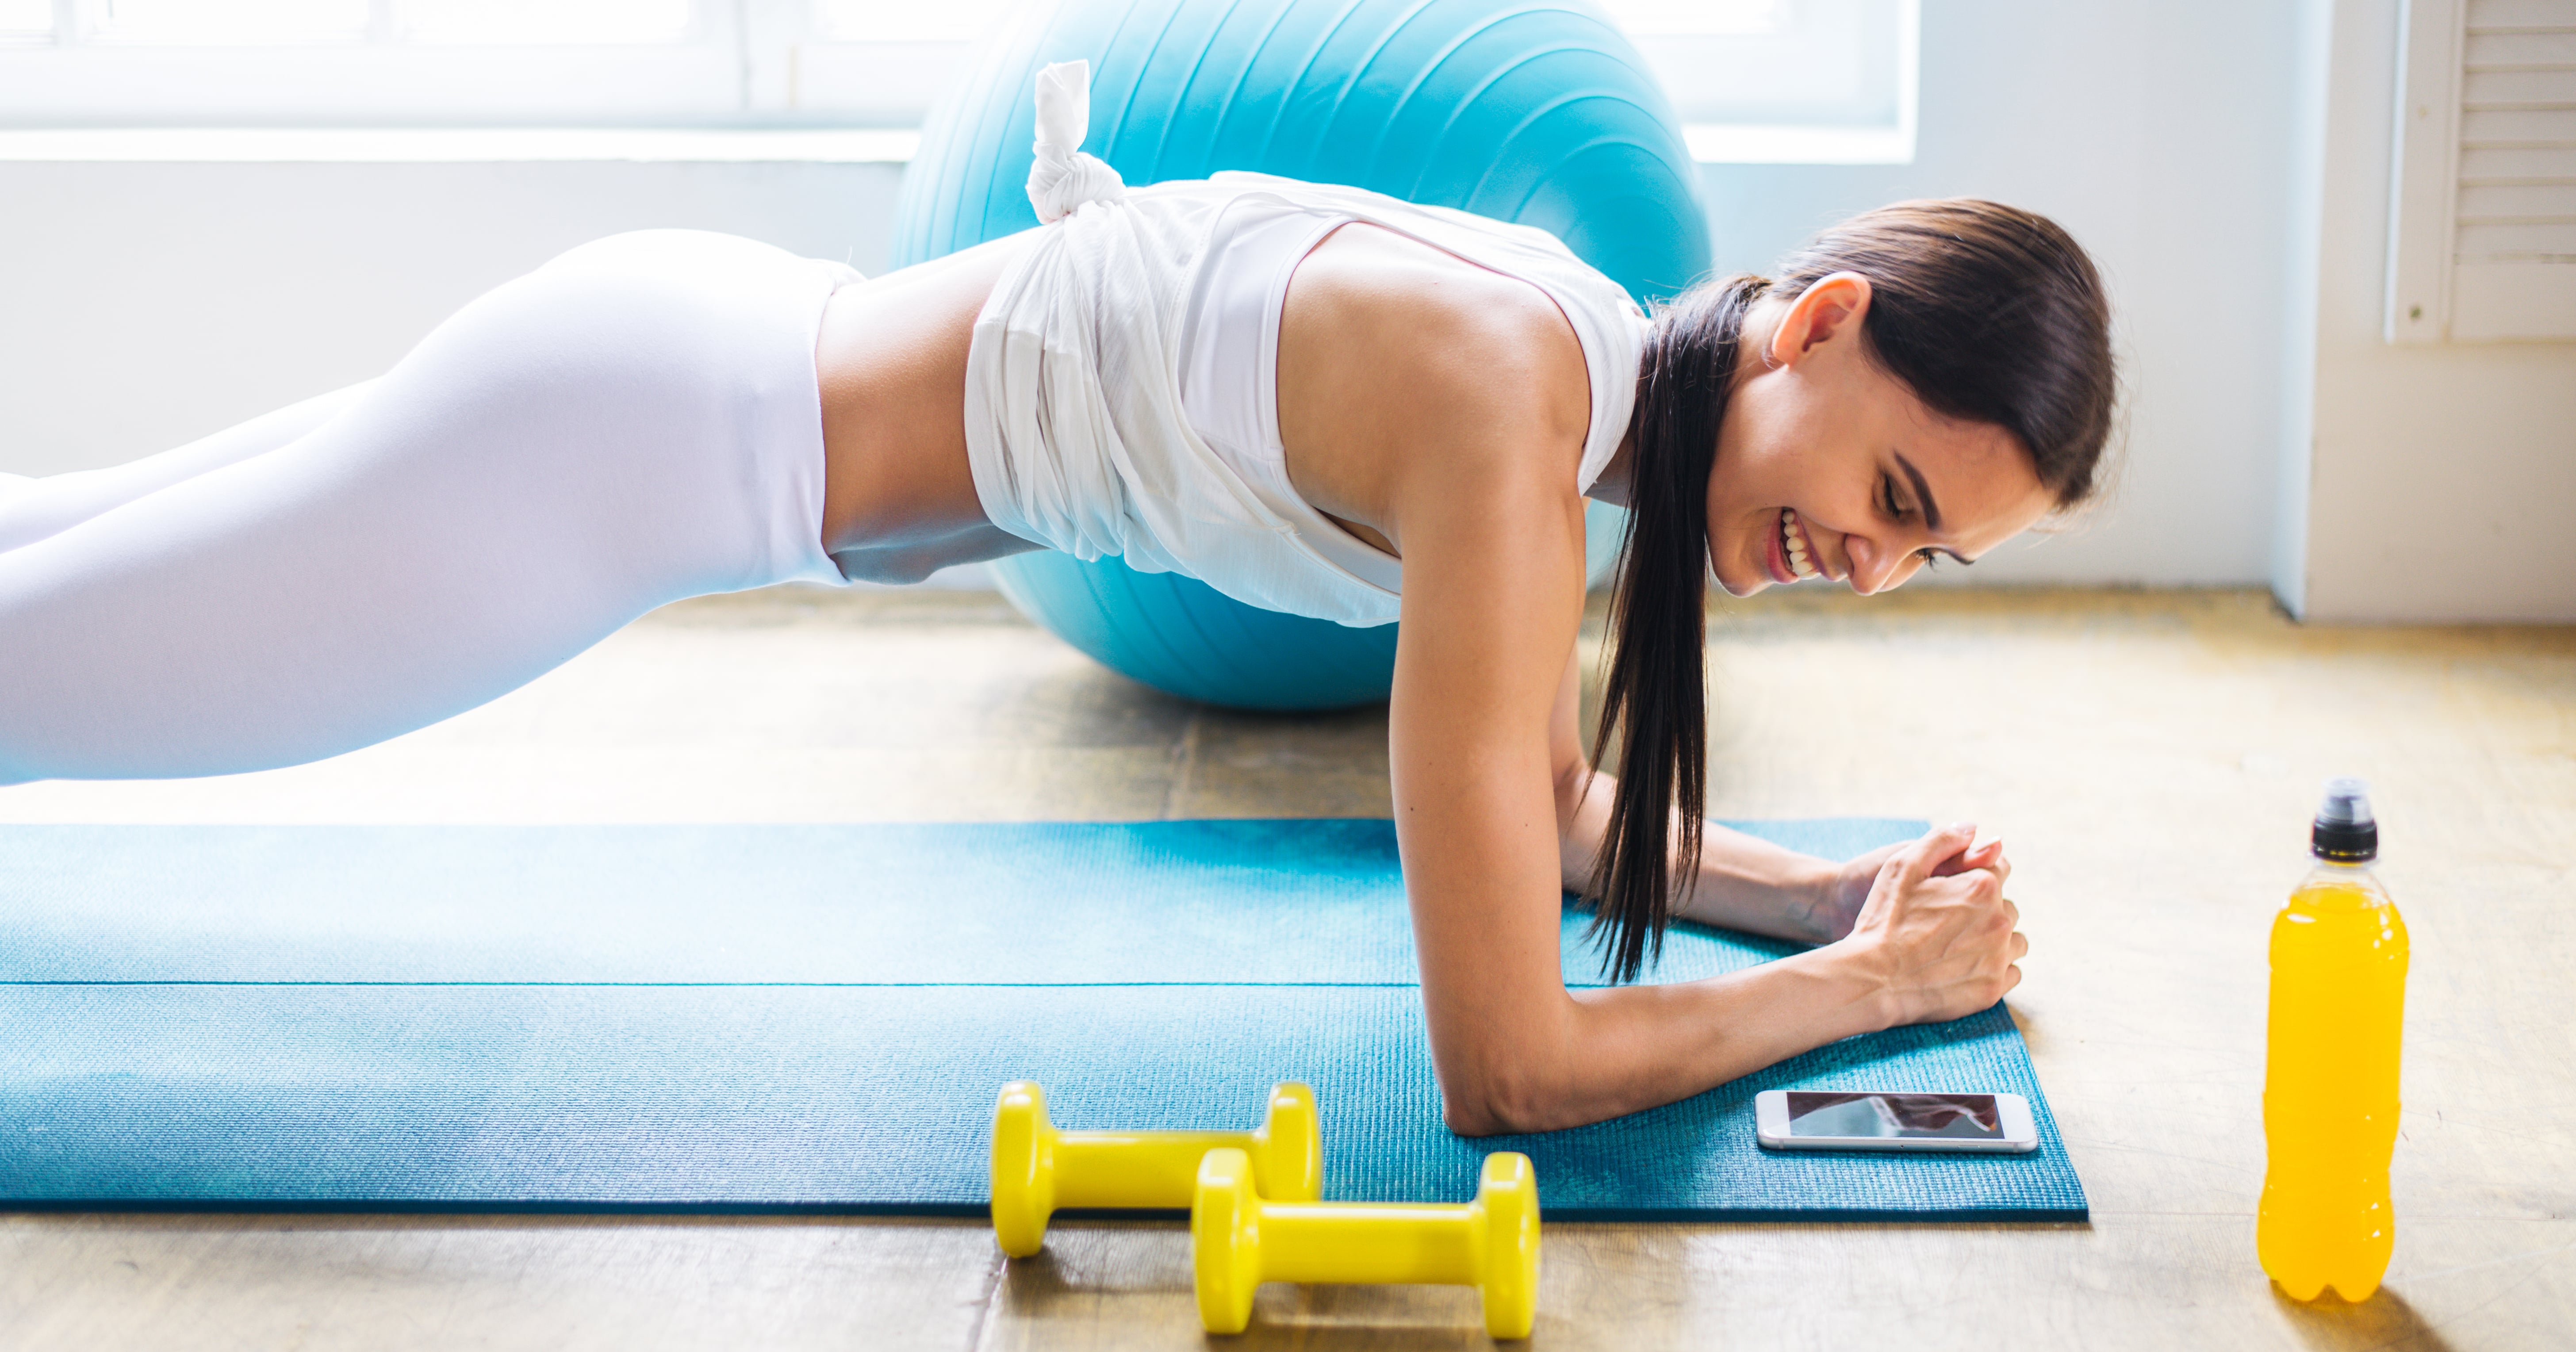 32 No-Equipment Ab Exercises You Can Do on a Mat